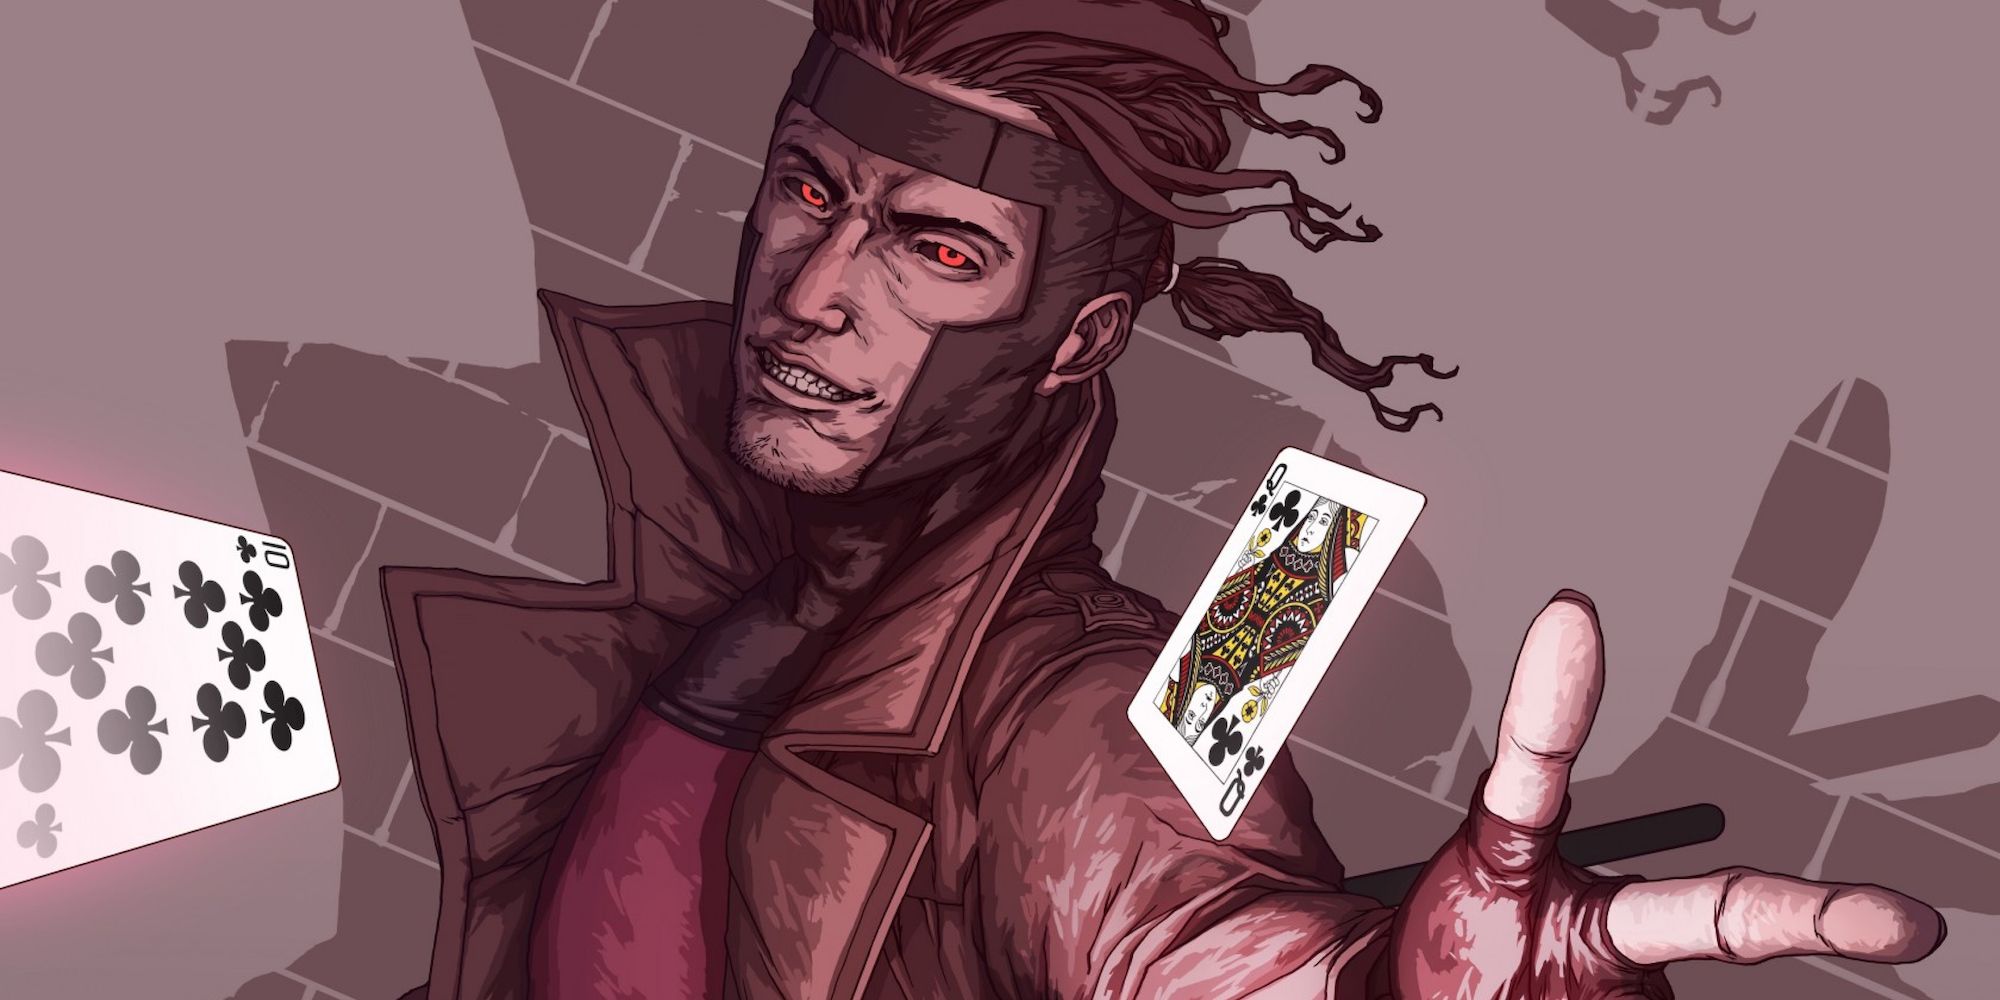 Gambit throwing his kinetic energy-charged cards in Marvel artwork